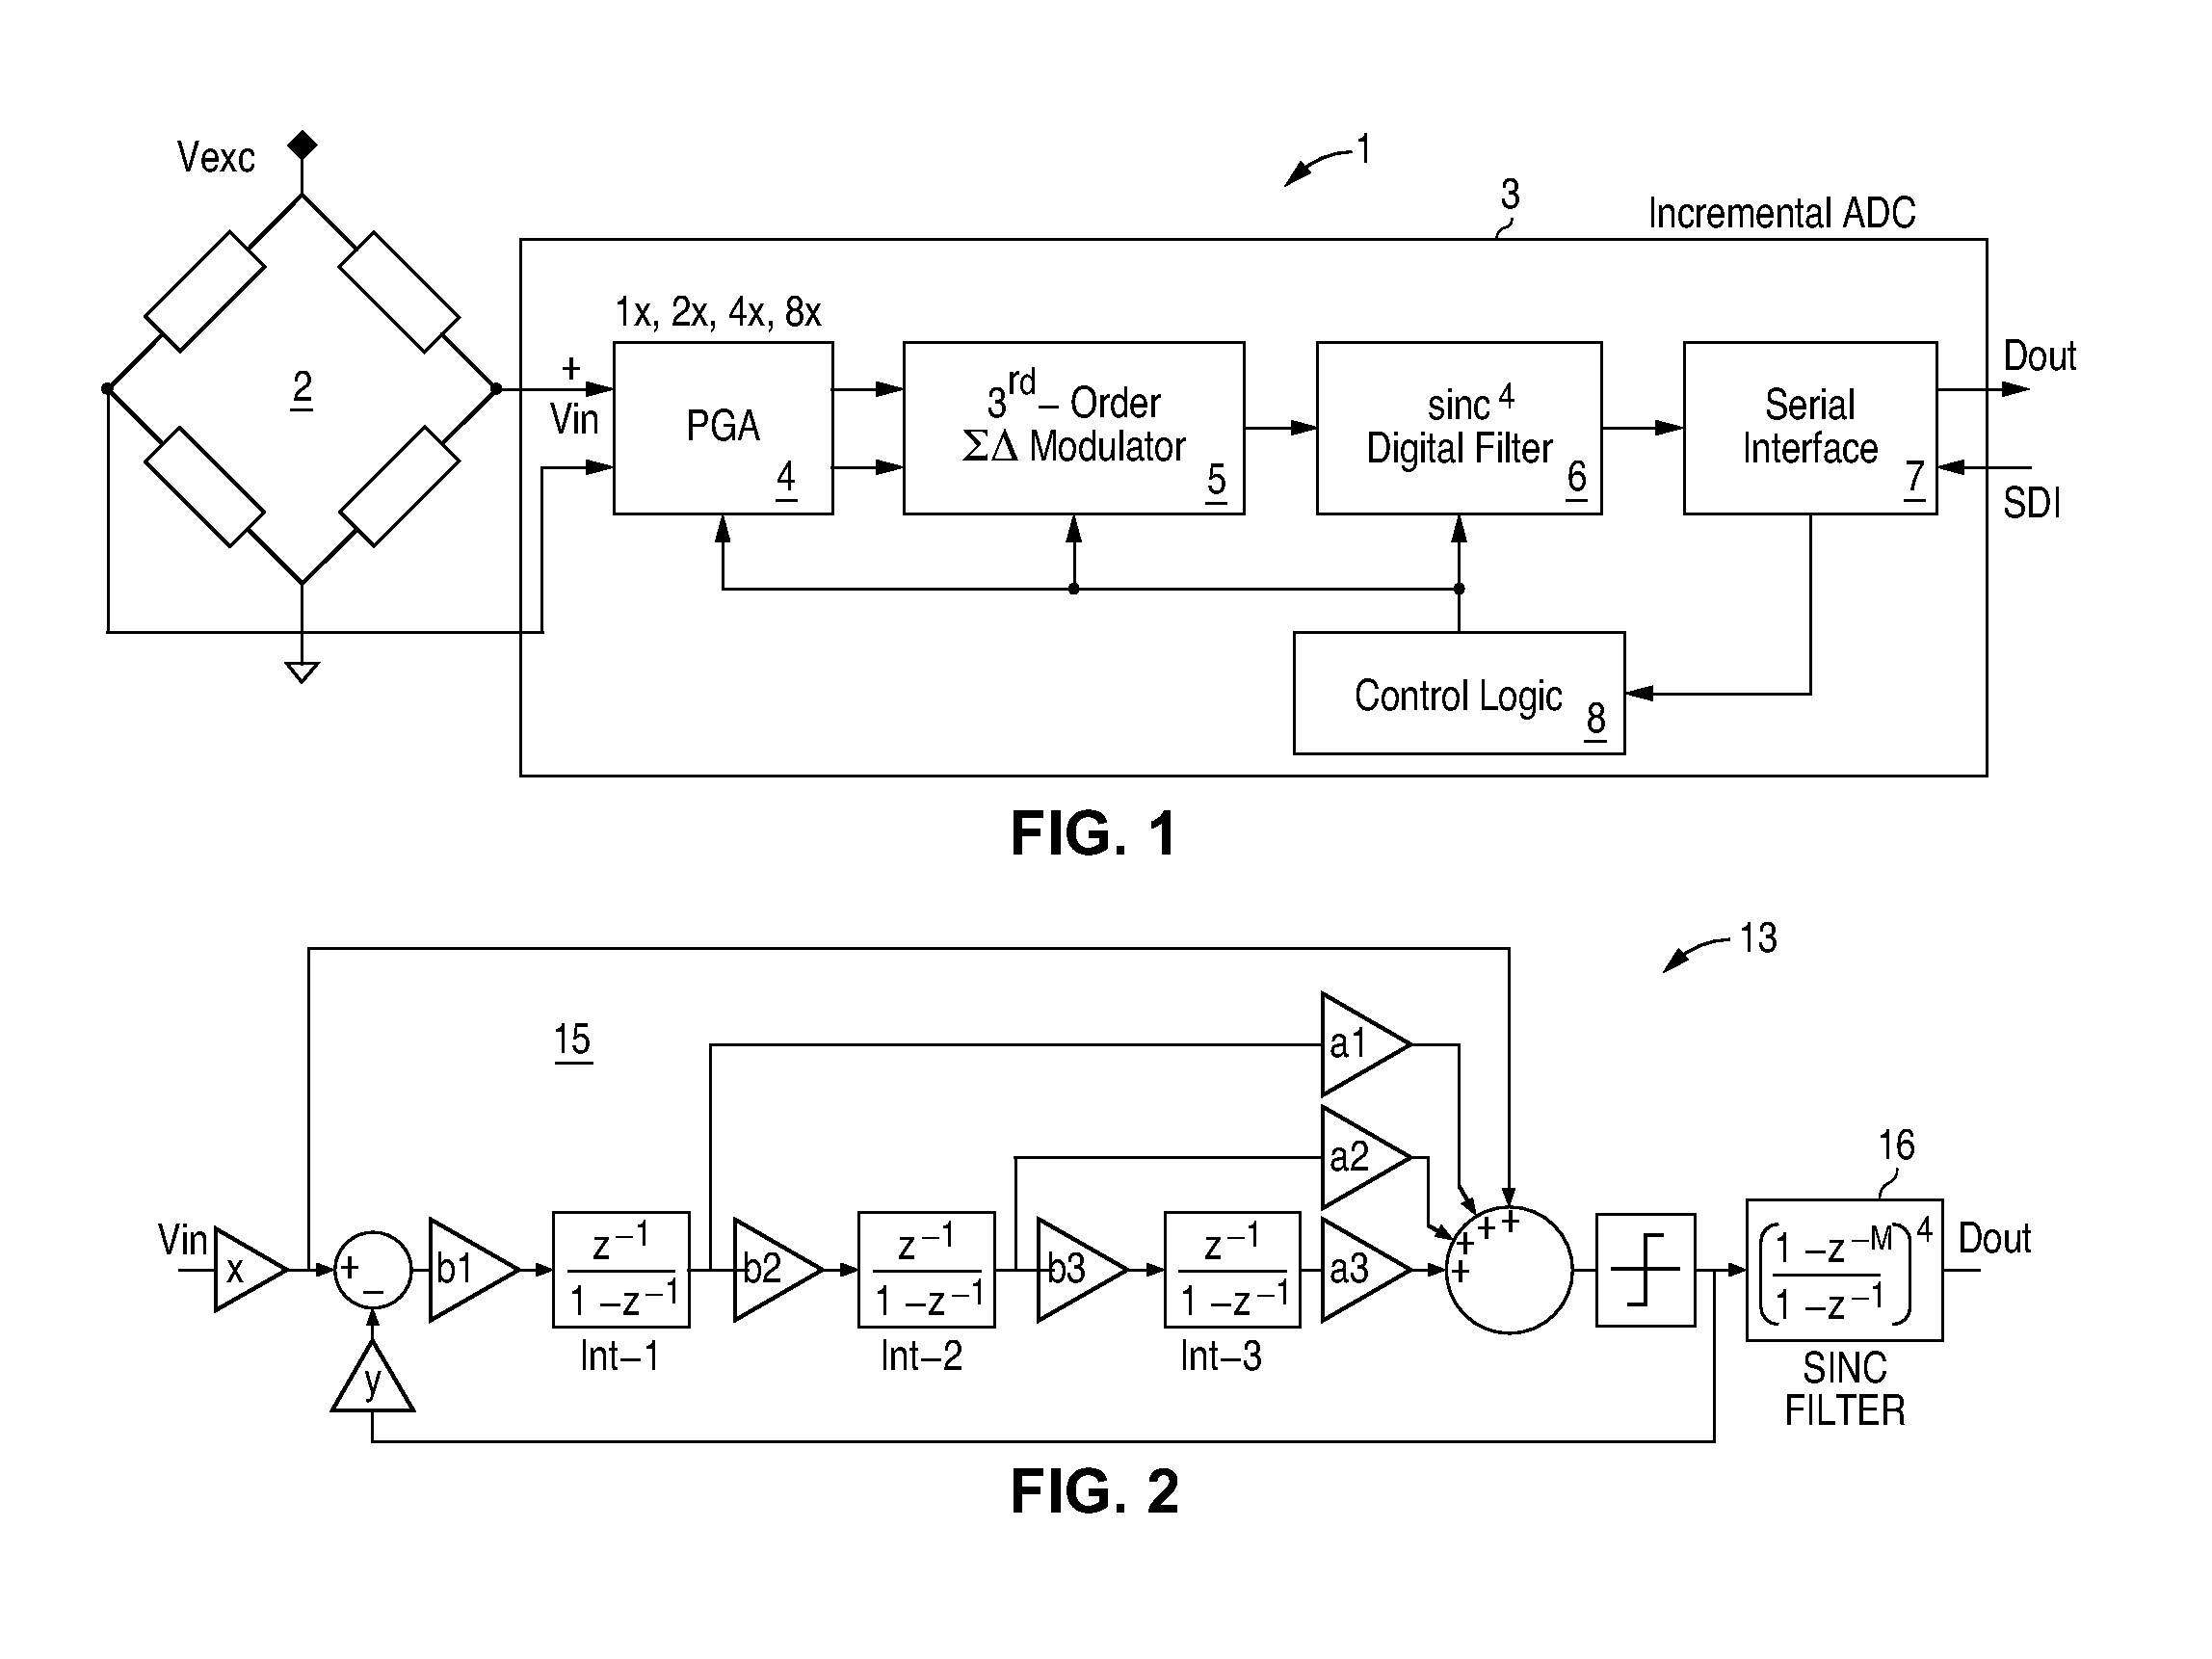 Capacitor rotation method for removing gain error in sigma-delta analog-to-digital converters